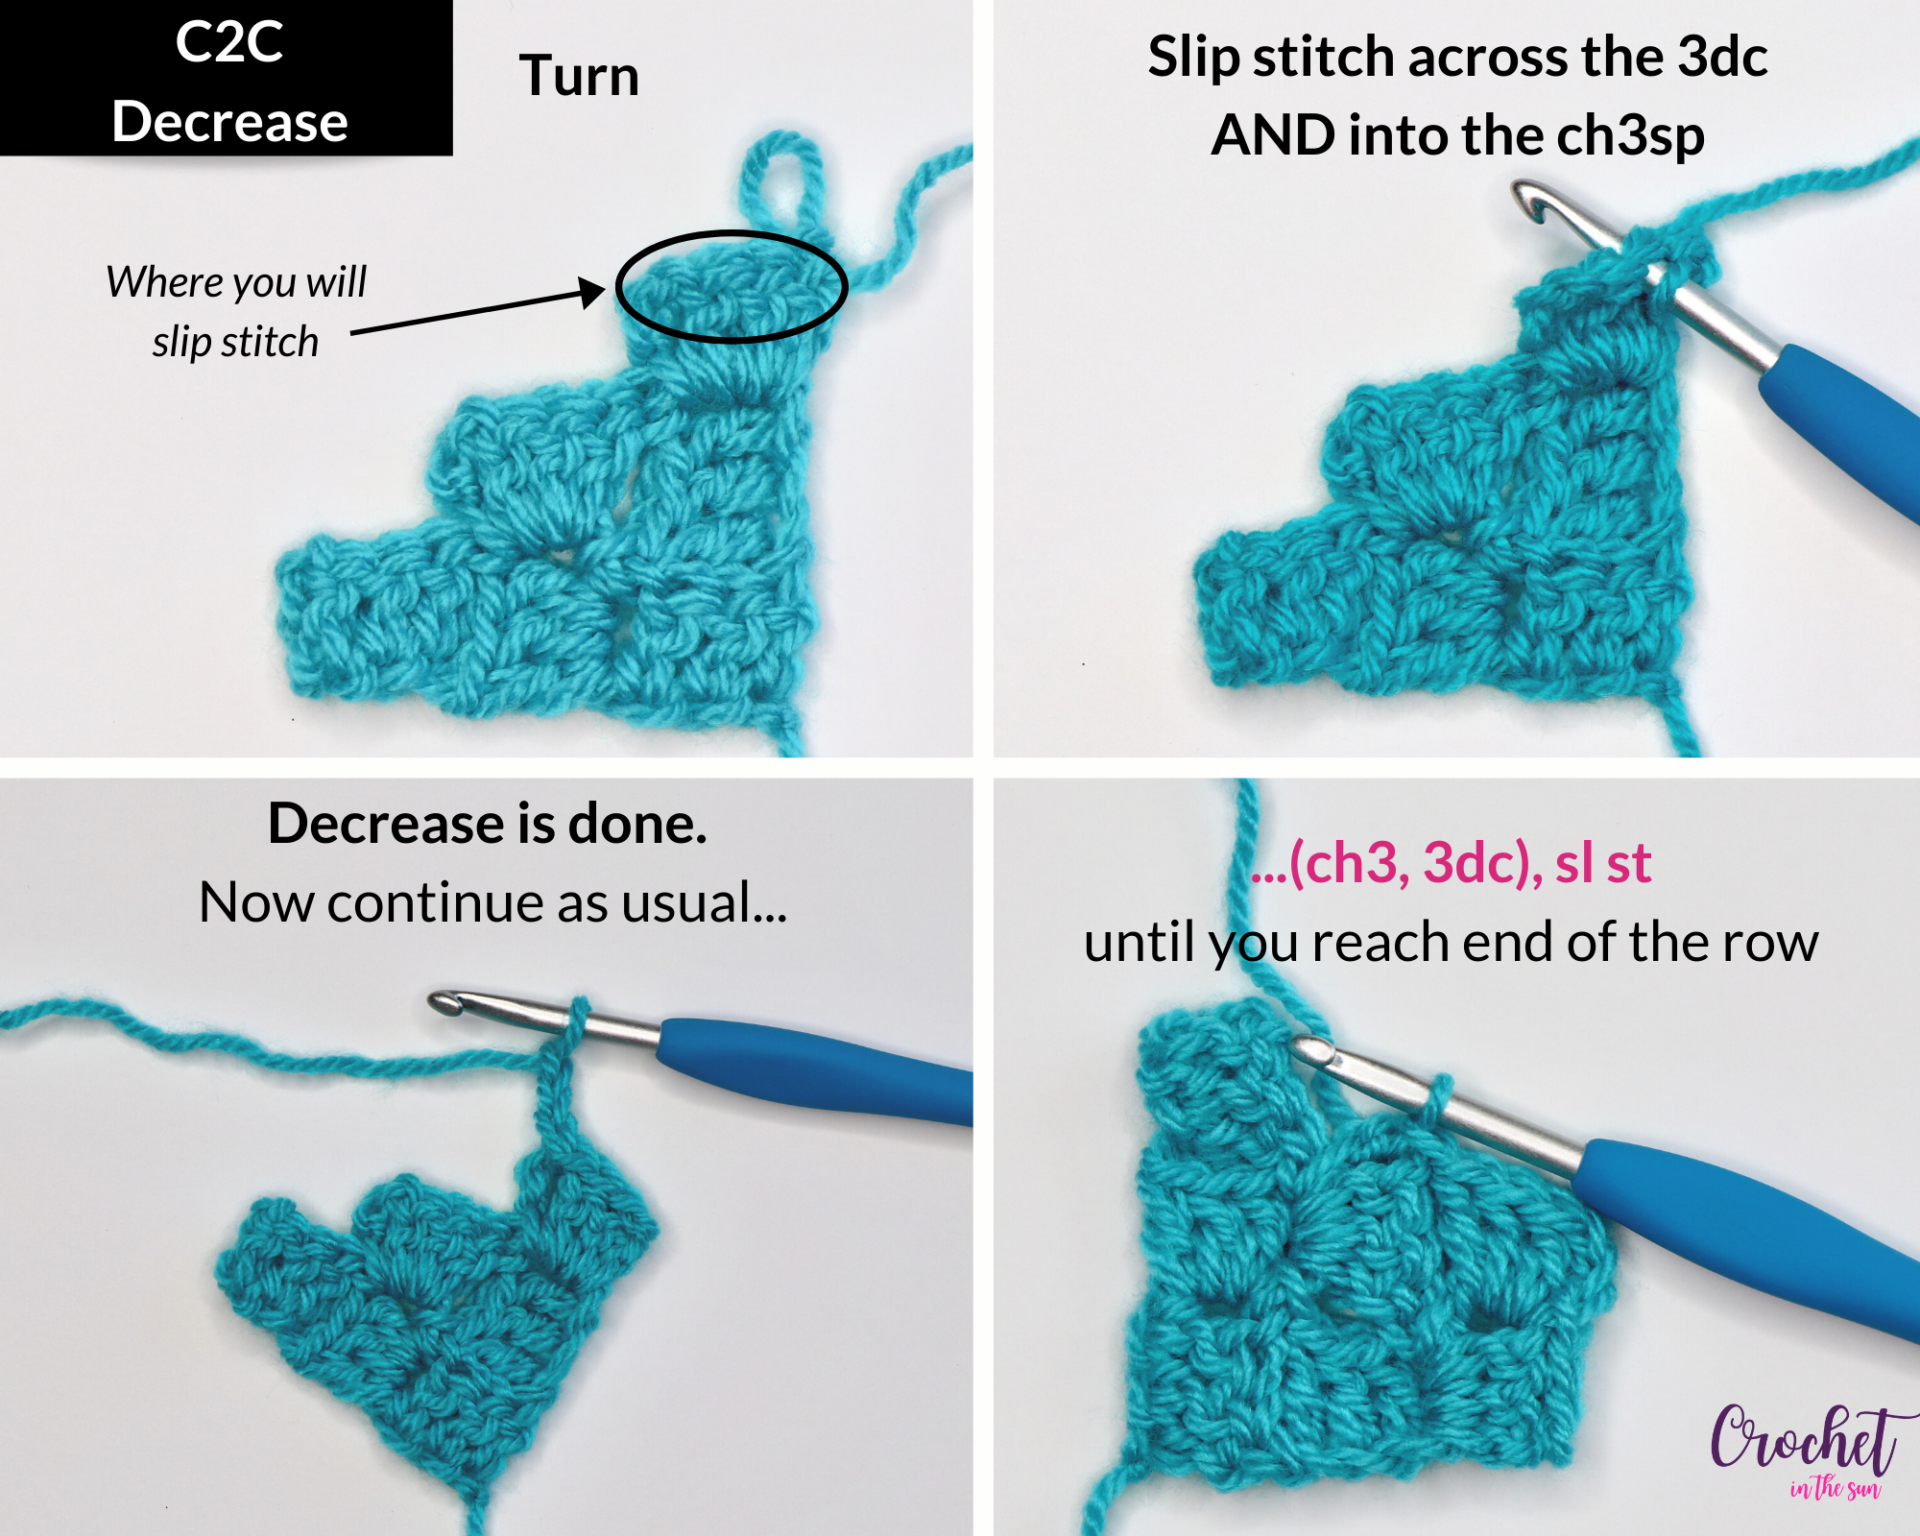 Learn how to corner to corner crochet. This shows how to DECREASE in c2c. This provides a clear, step-by-step photo tutorial for the c2c stitch (corner to corner stitch). This stitch is easy to learn and is beginner friendly. Learn how to crochet!